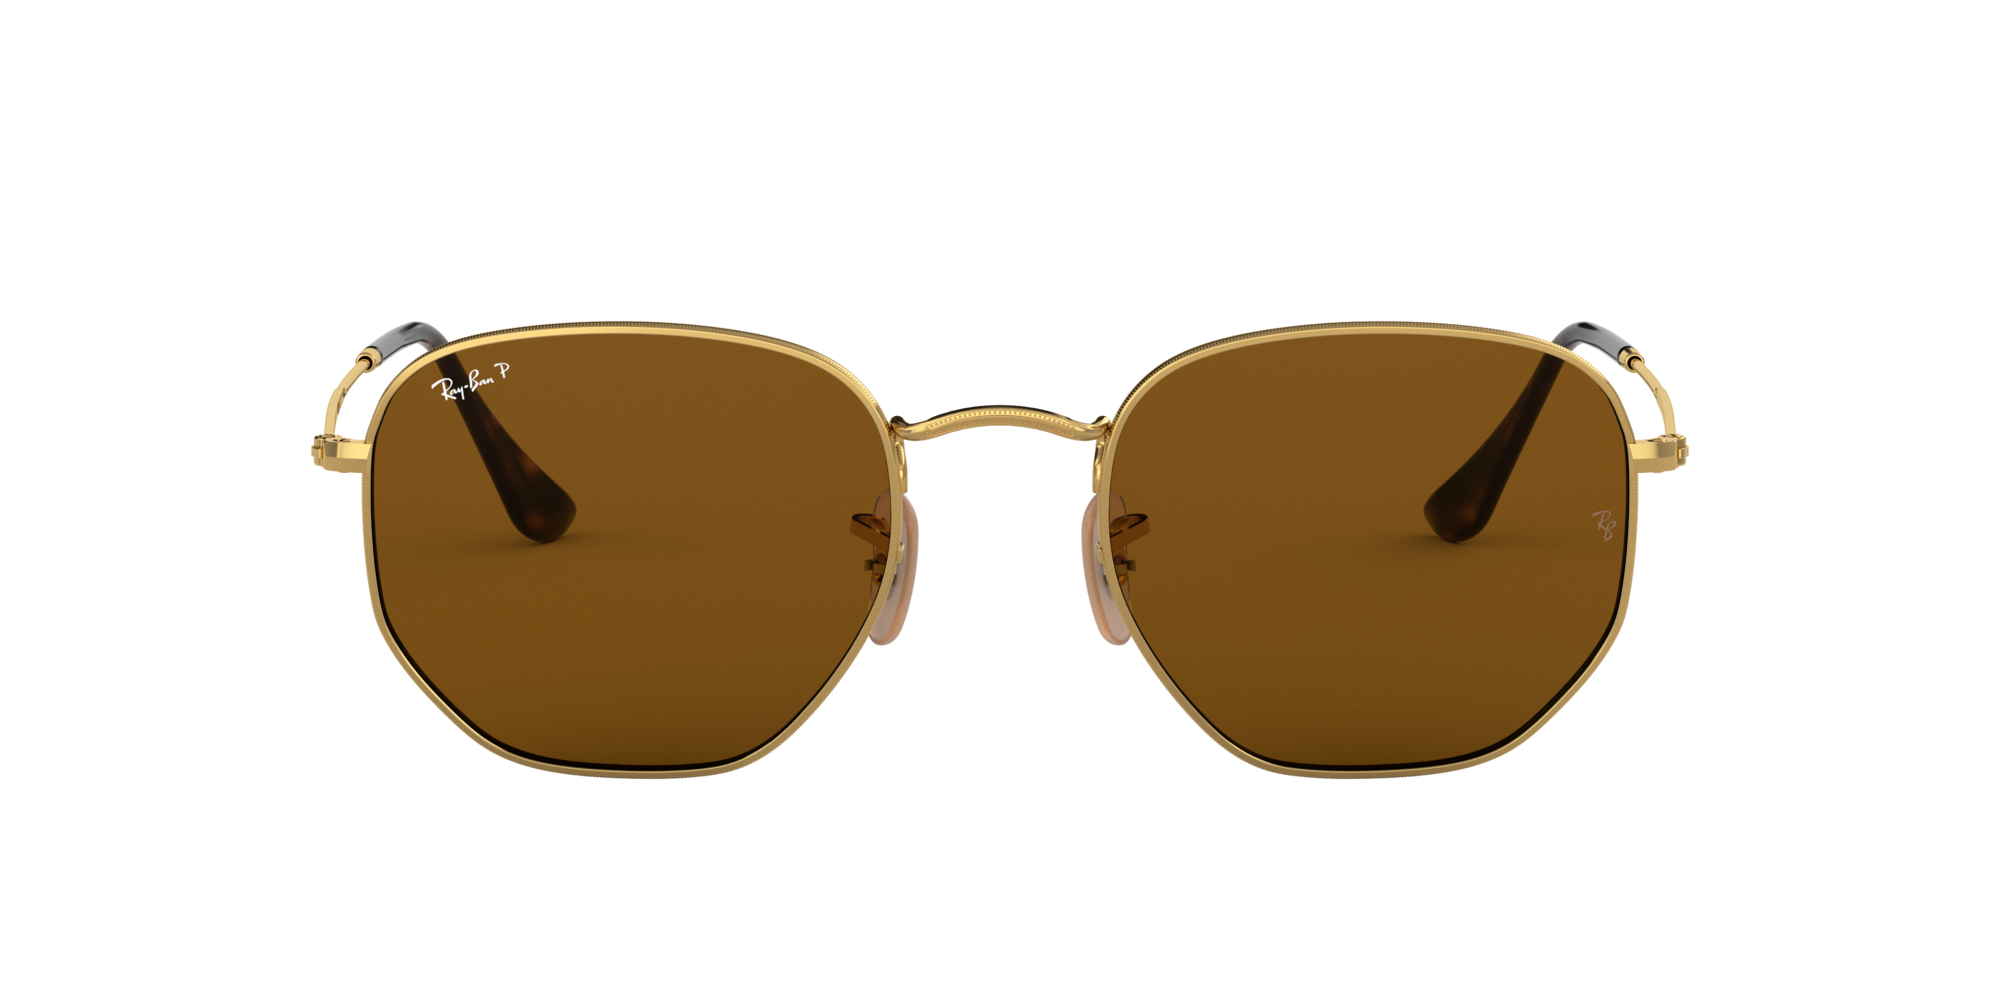 lenscrafters ray ban womens sunglasses